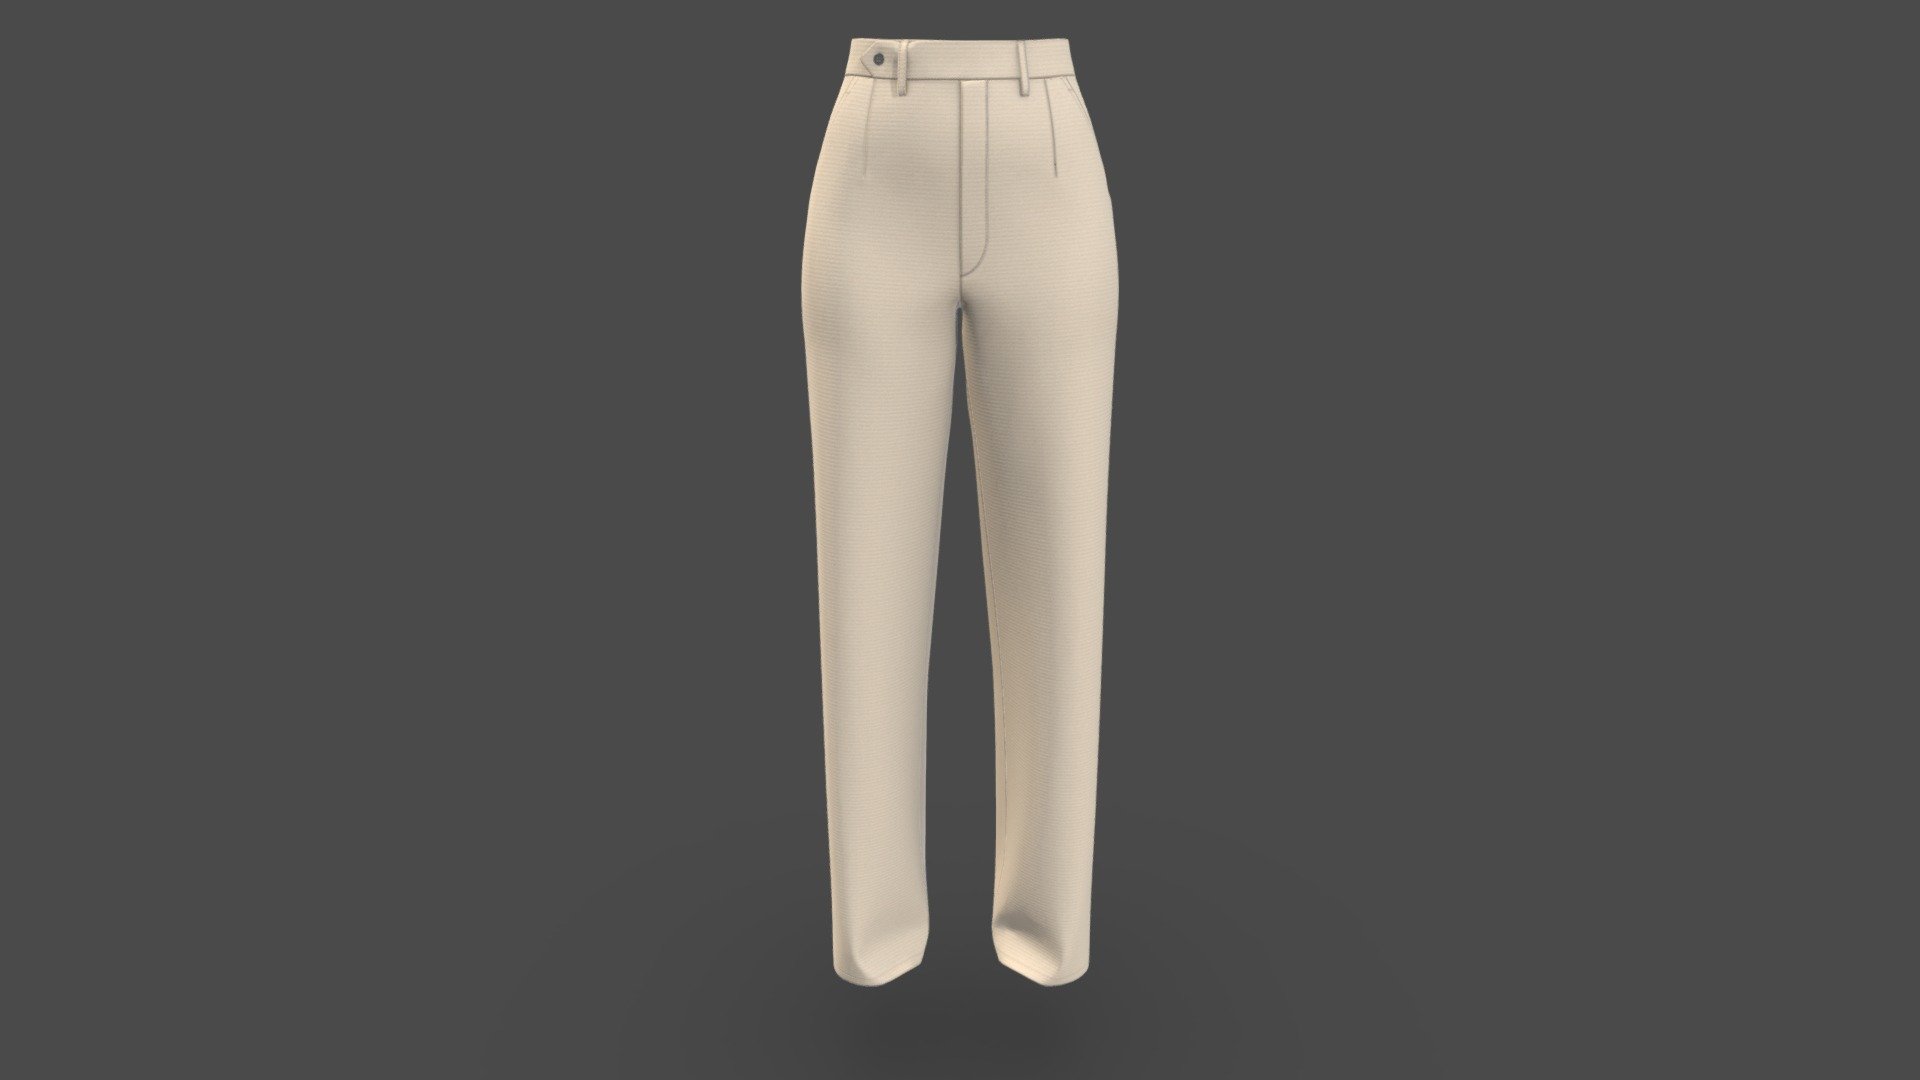 Women Fashion Chino Pant
Version V1.0

Realistic high detailed Women Chino Pant with high resolution textures. Model created by our unique processing &amp; Optimized for Web and AR / VR. 

Features

Optimized &amp; NON-Optimized obj model with 4K texture included




Optimized for AR/VR/MR

4K &amp; 2K fabric texture and print details

Optimized model is 1.97MB

NON-Optimized model is 18.3MB

Woven fabric texture details included

GLB file in 2k texture size is 3.90MB

GLB file in 4k texture size is 17.3MB  (Game &amp; Animation Ready)

Suitable for web application configurator development.

Fully unwrap UV

The model has 1 material

Includes high detailed normal map

Unit measurement was inch

Triangular Mesh with 11k Vertices

Texture map: Base color, OcclusionRoughnessMetallic(ORM), Normal

We make the digital 3D apparel design service affordable and compatible for your fast moving business.

For more details or custom order send email: hello@binarycloth.com


Website:binarycloth.com - Women Fashion Apparel Chino Pant - Buy Royalty Free 3D model by BINARYCLOTH (@binaryclothofficial) 3d model